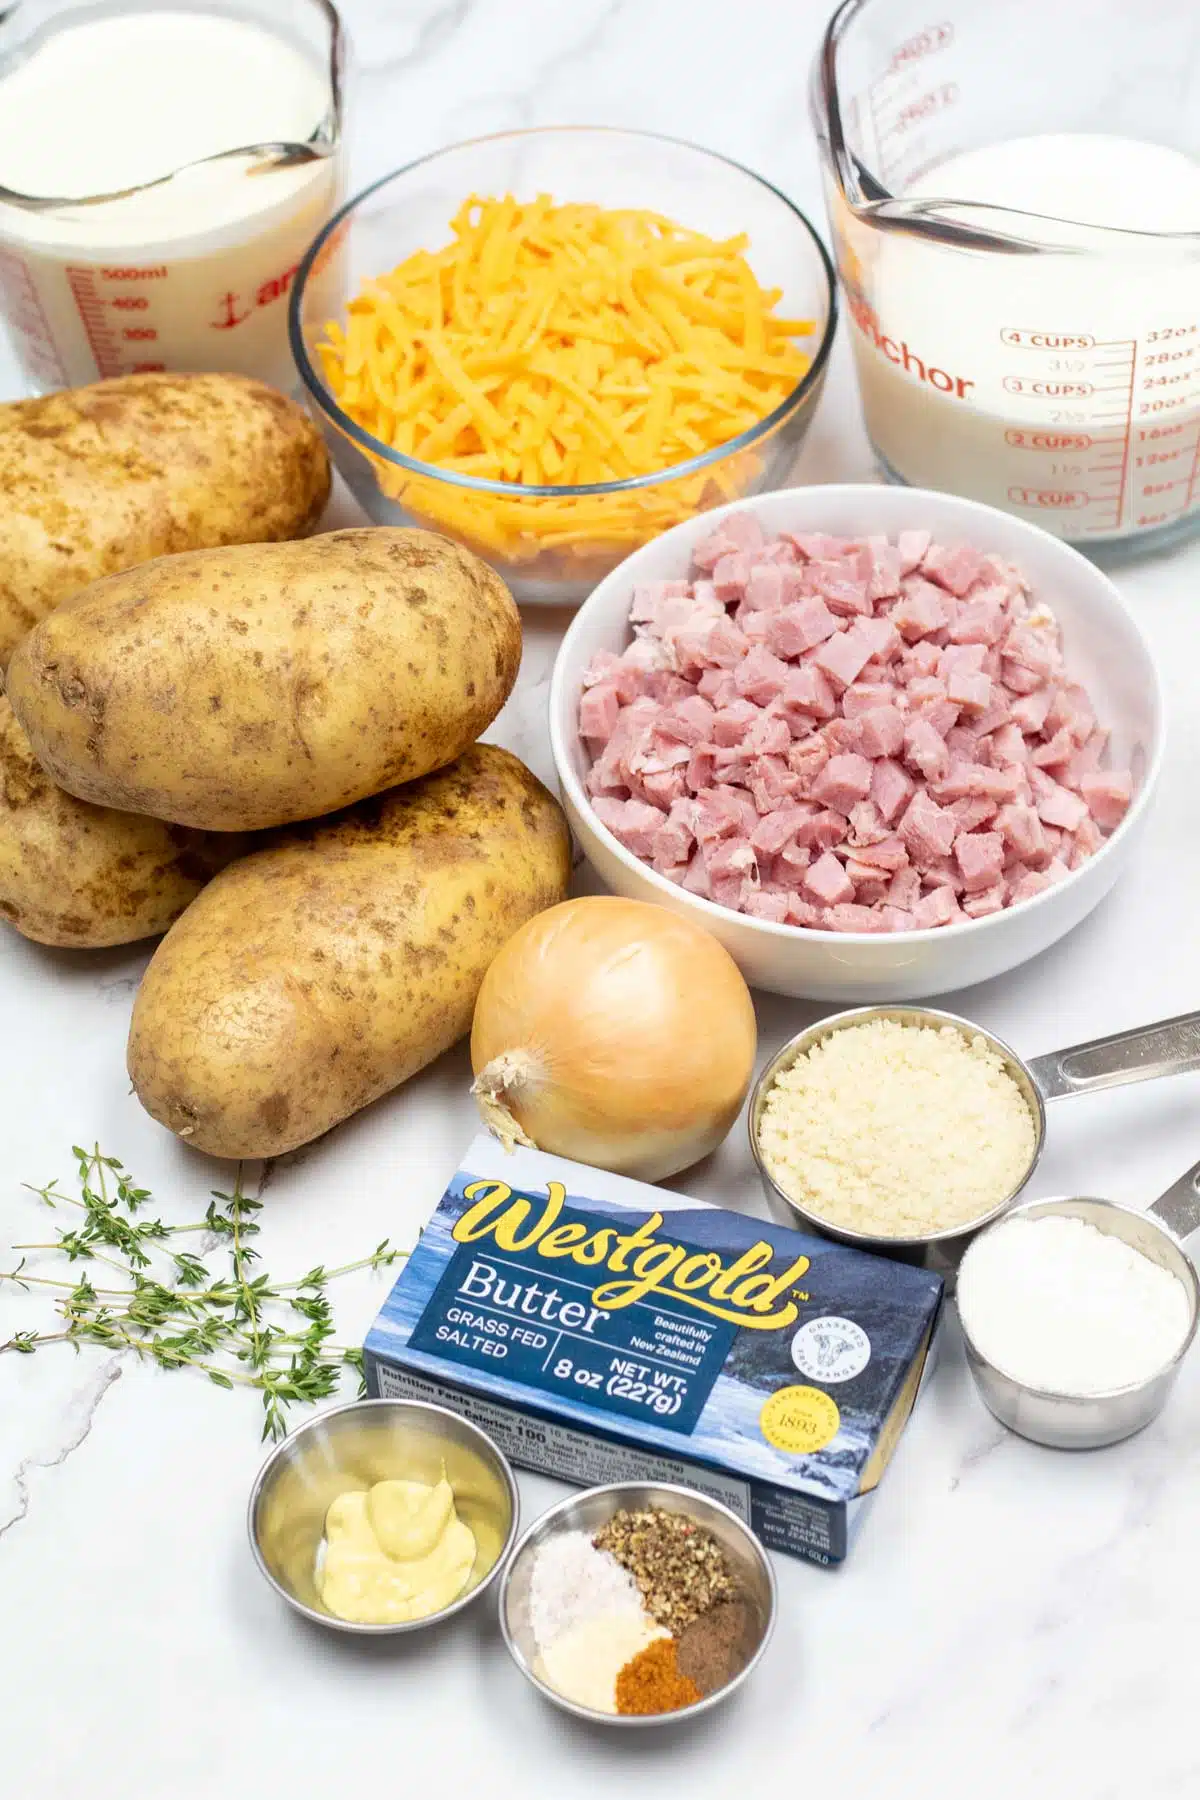 Tall image showing holiday ham casserole ingredients.